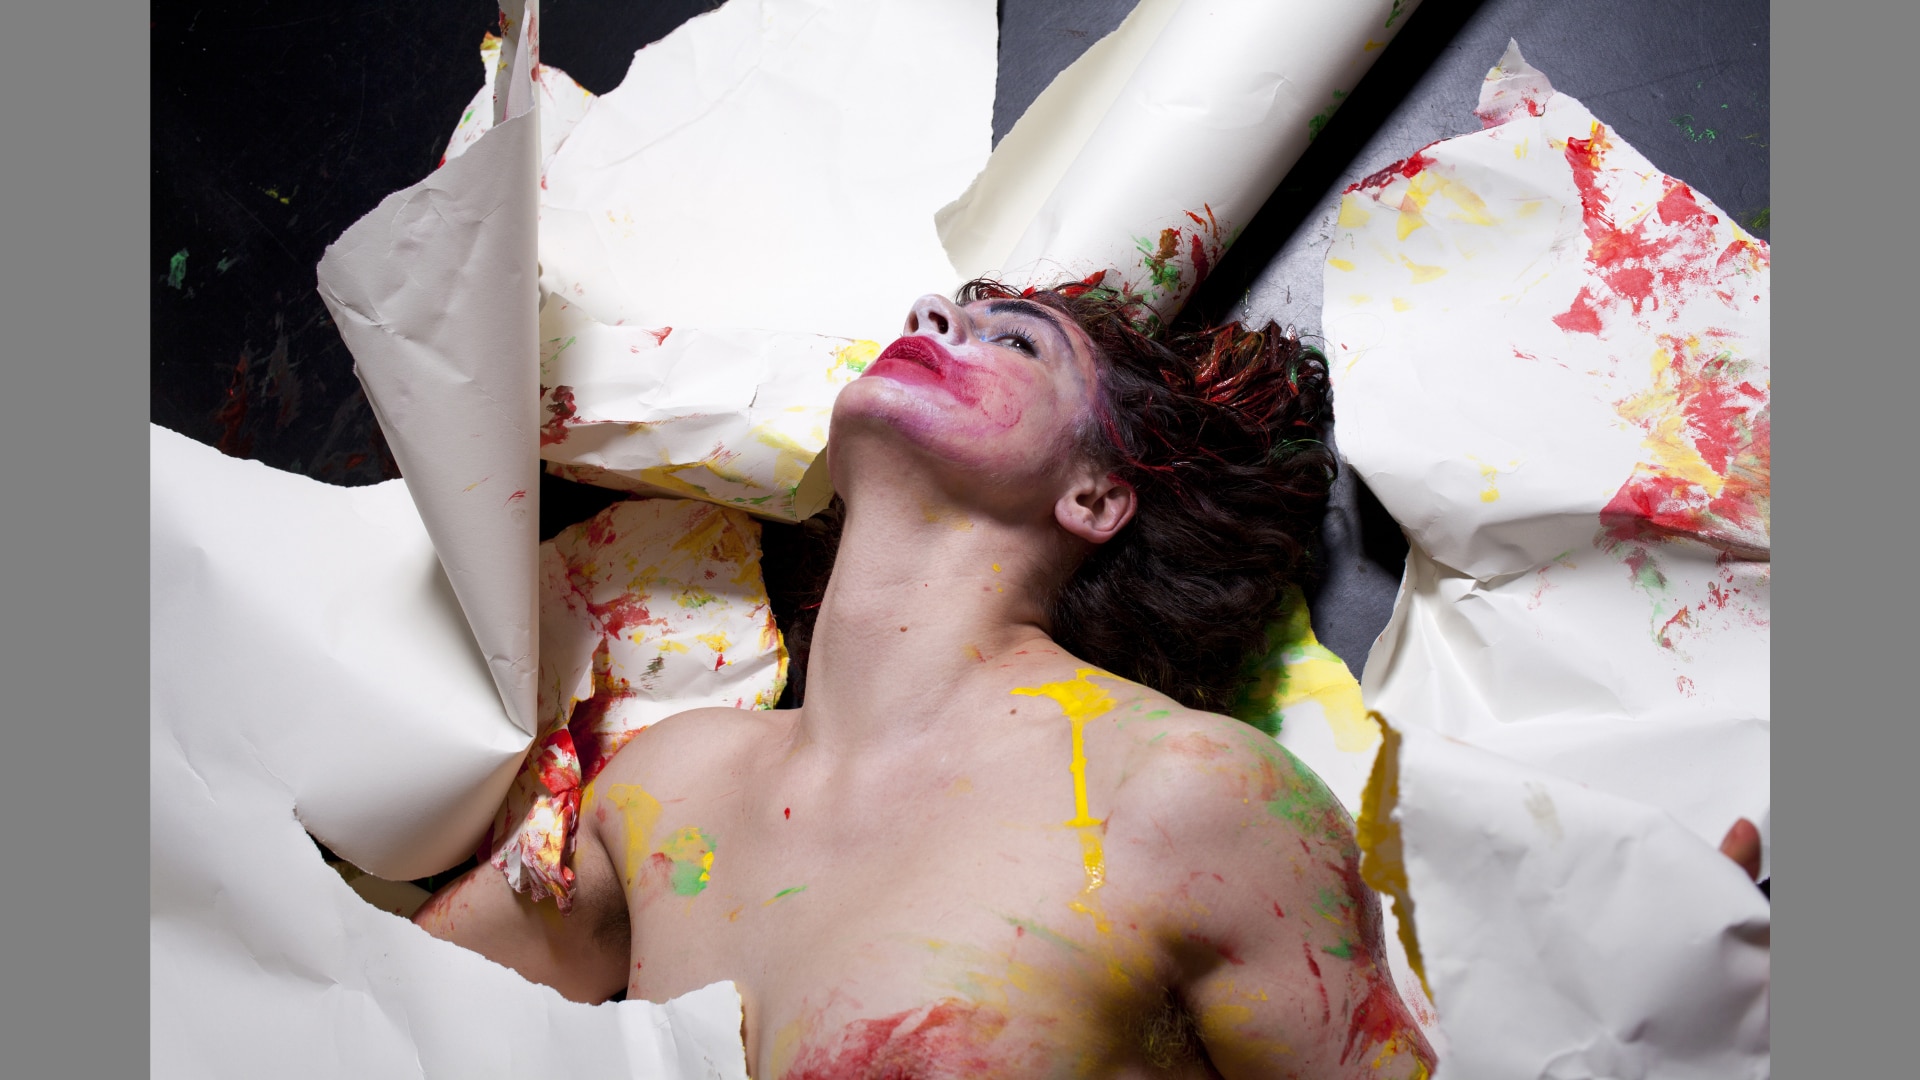 Laura Murphy bursts nude through masses of white material. She tilts her face back. Her face is covered in thick makeup